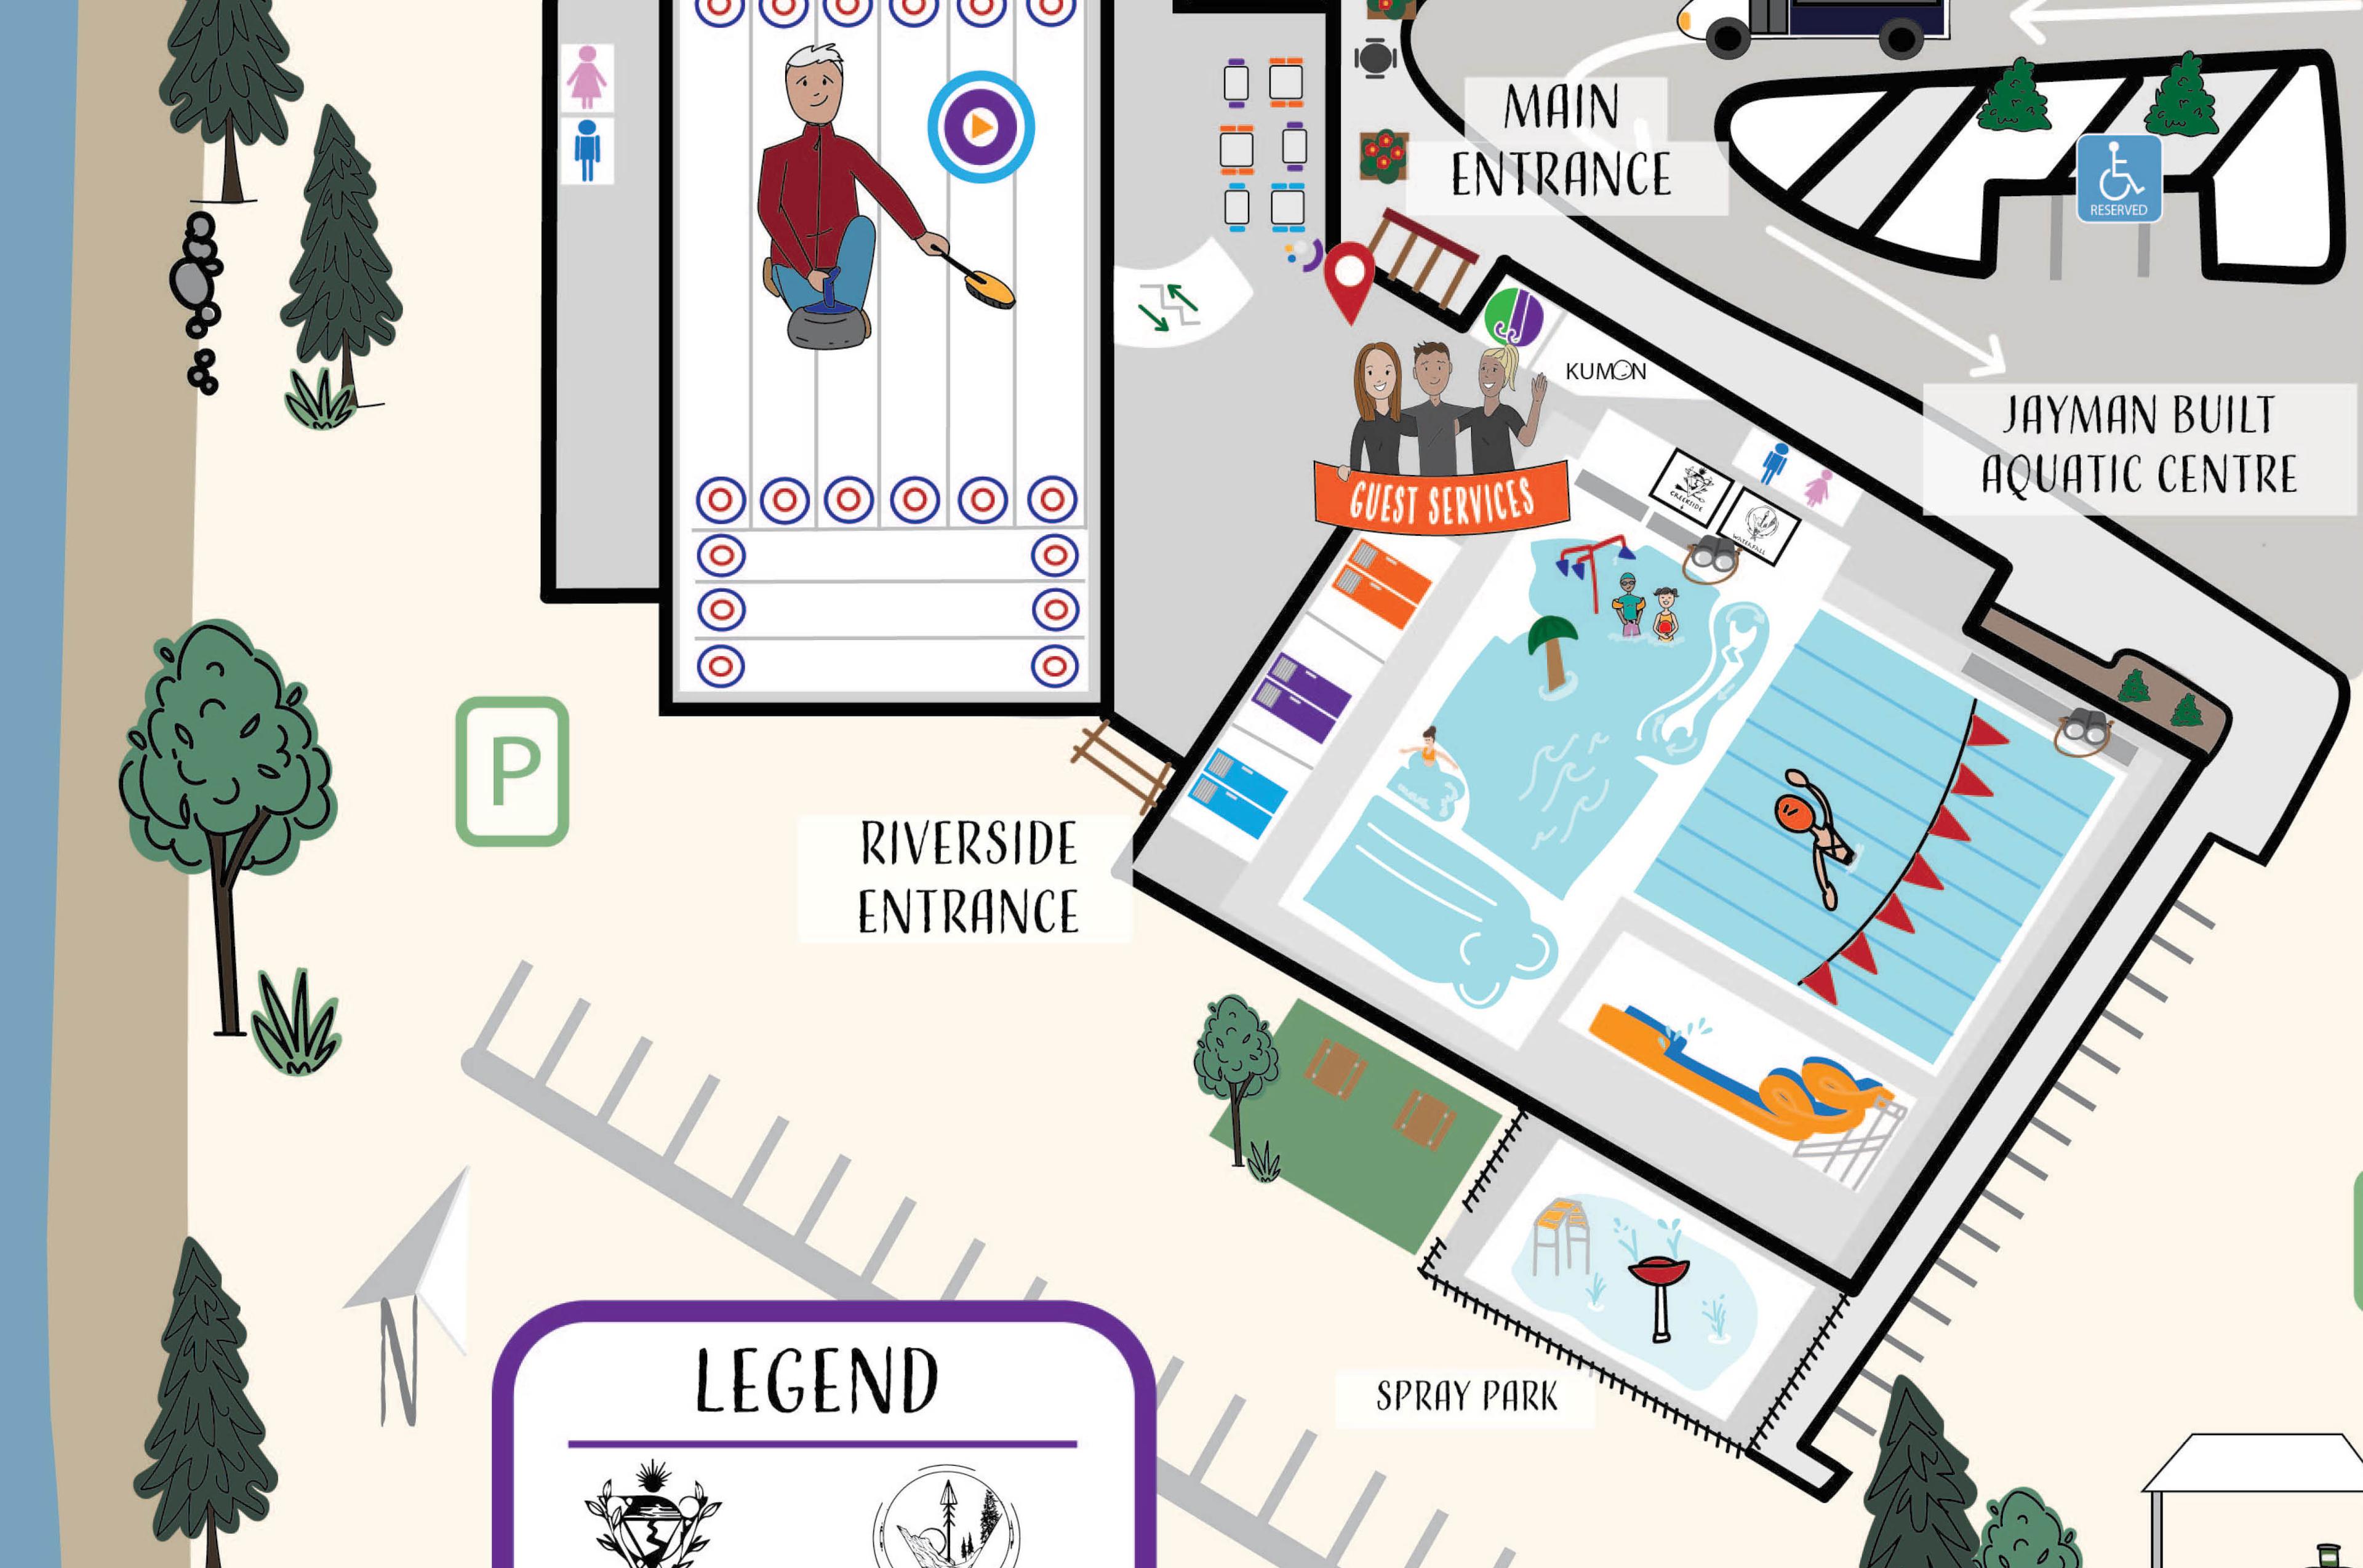 Illustrated map of the SLS Centre entrances highlighting curling and swimming facilities.